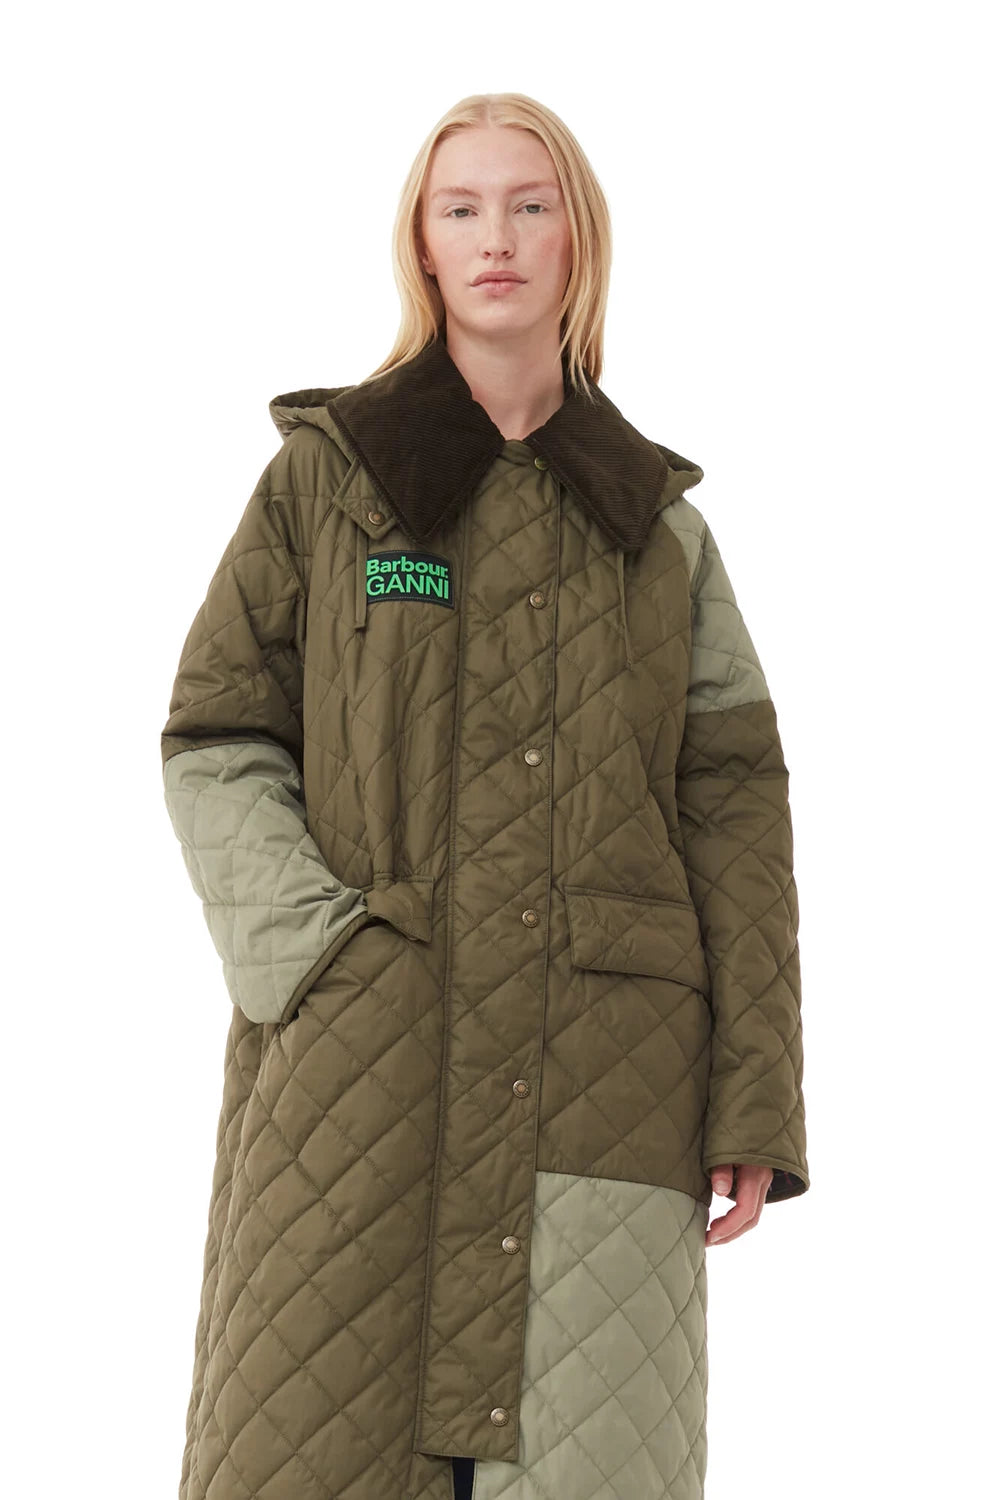 Barbour-GANNI-Burghley-Quilted-Jacket-Fern-Light-Moss-Classic